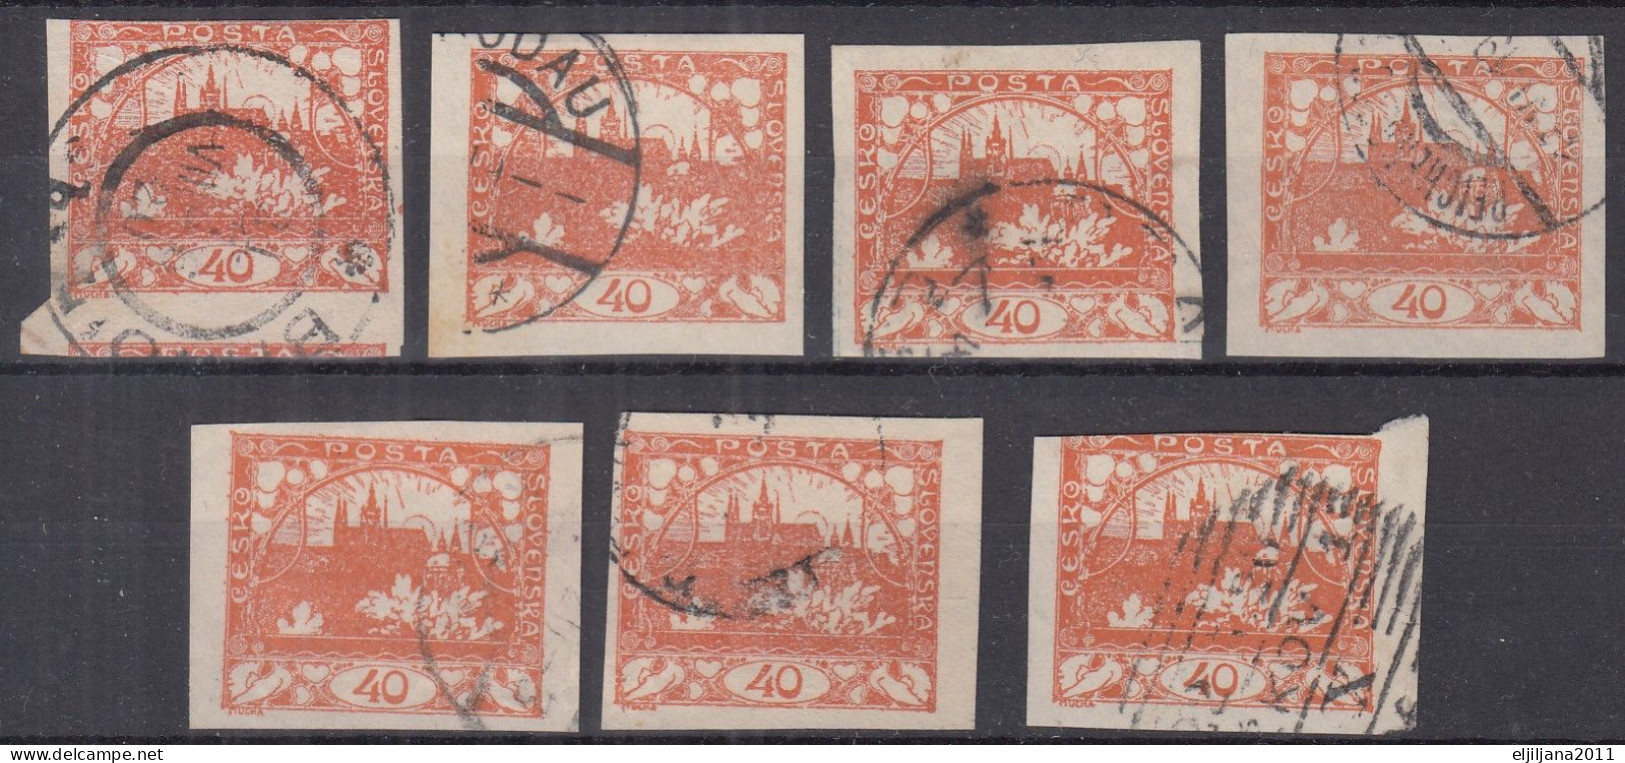 ⁕ Czechoslovakia 1918-1919 ( Castle Of Prague ) ⁕ Hradcany 40 H. Mi.7 ⁕ 7v Used / Shades / Imperf. - Scan - Used Stamps